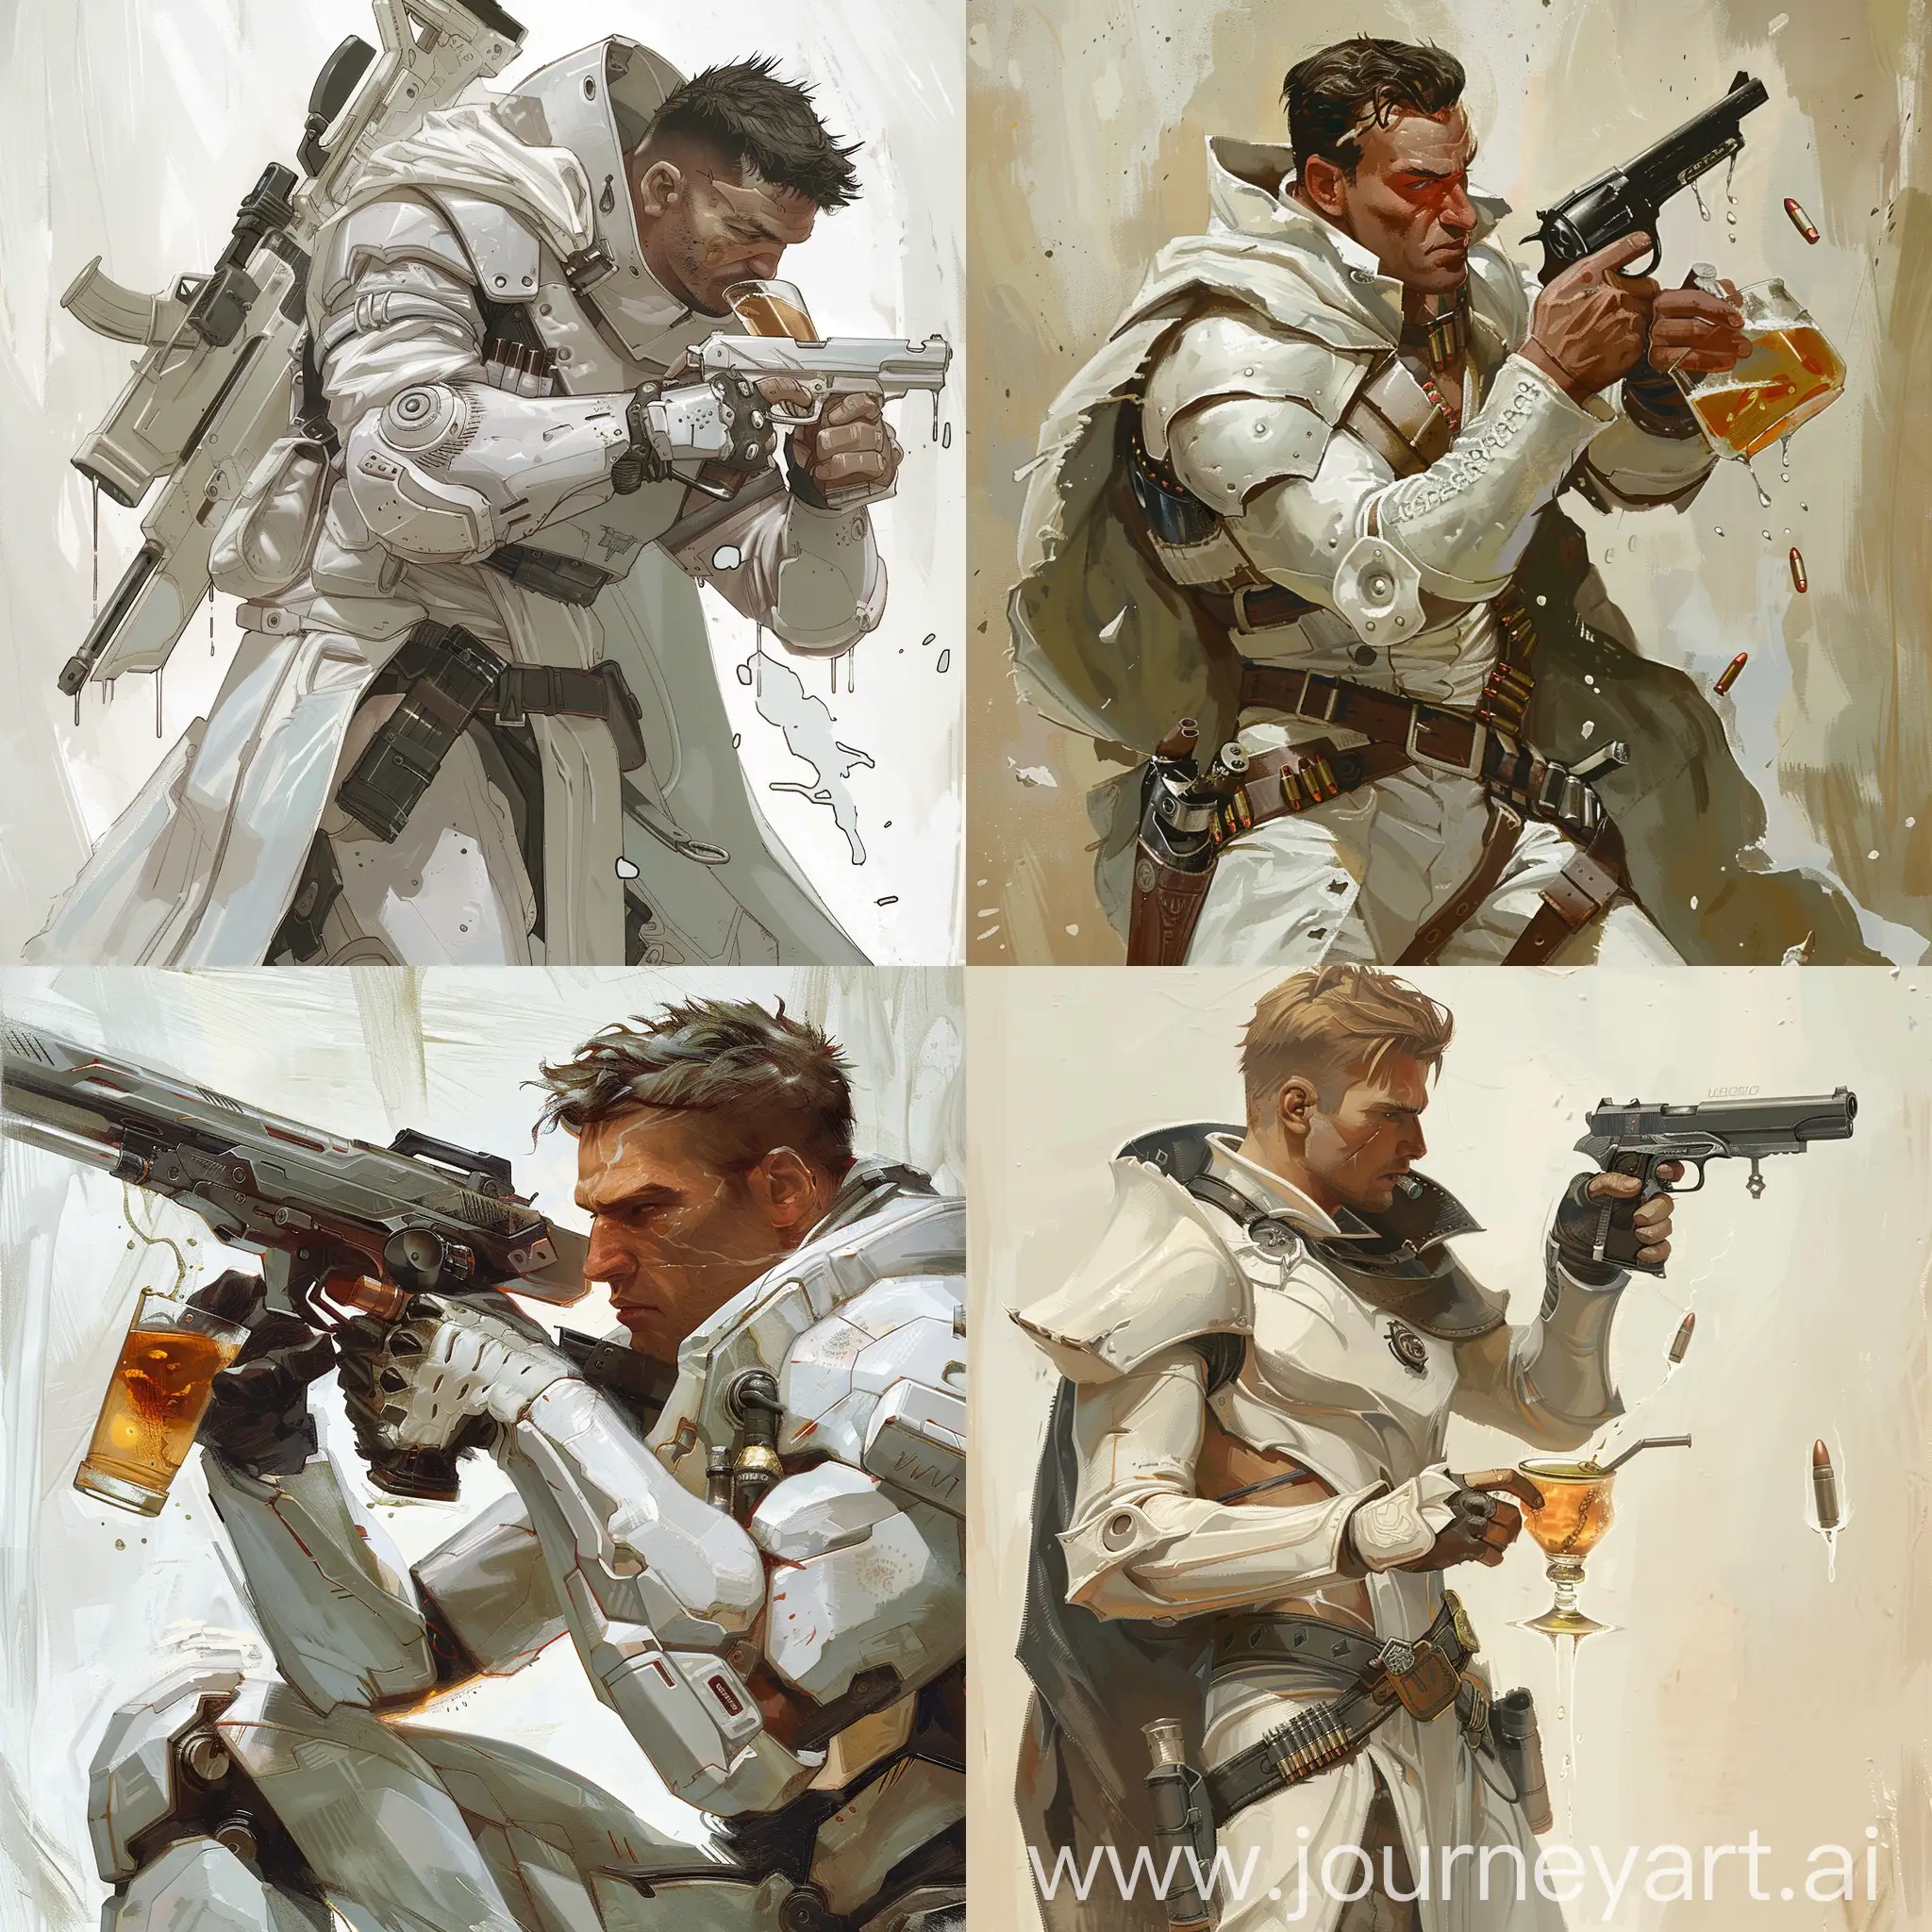 Armed-Man-in-White-Armor-Drinking-and-Handling-Weaponry-Illustration